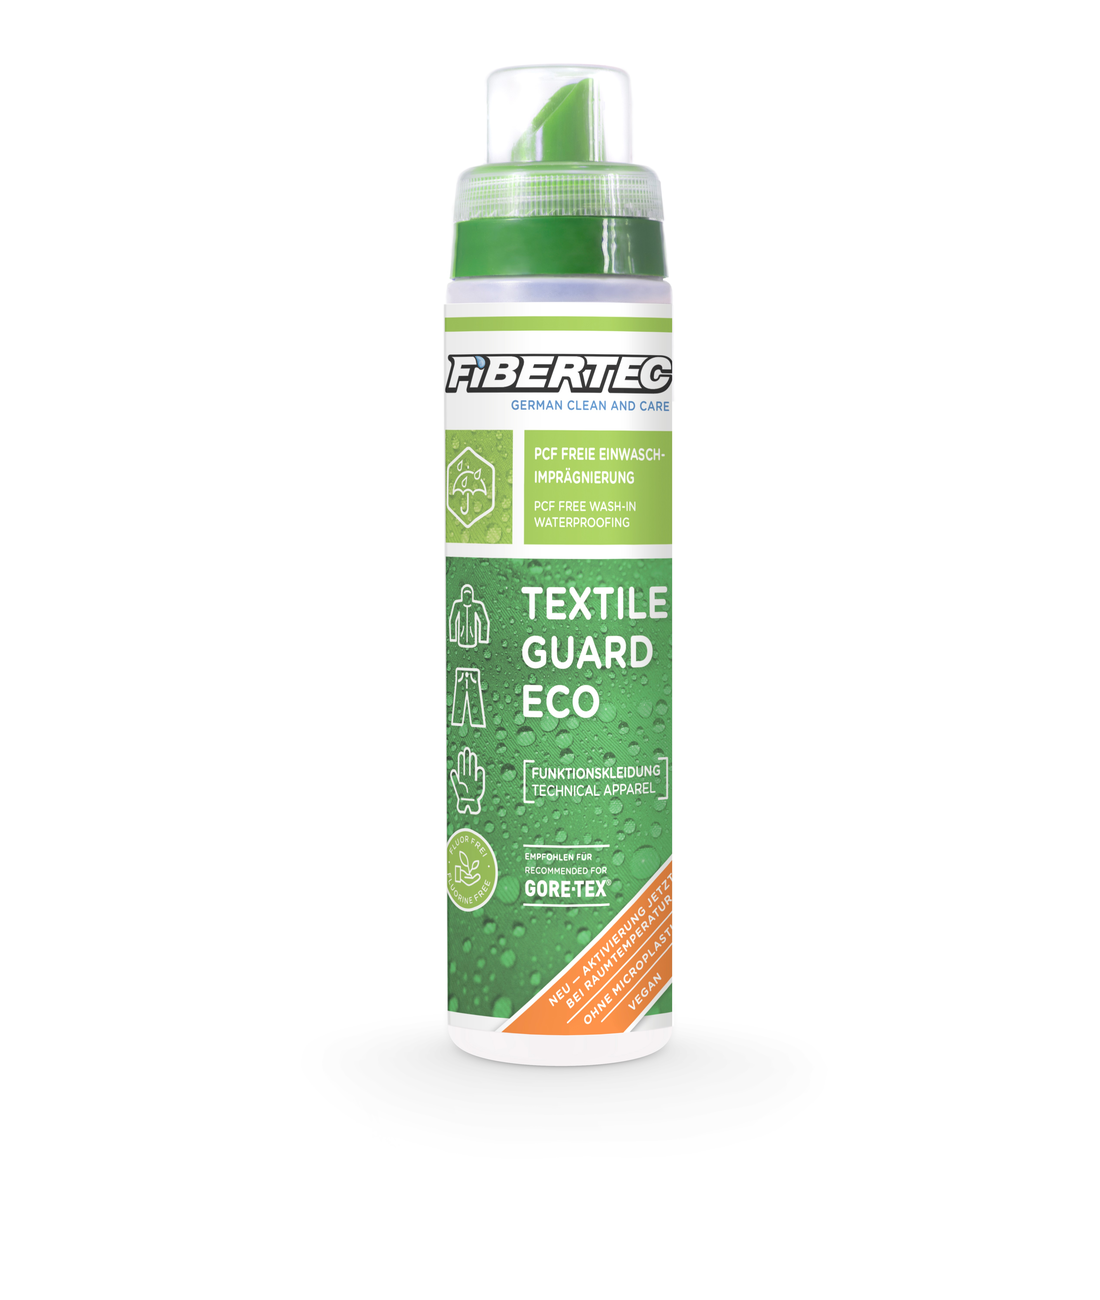 Textile Guard Eco RT Wash-In